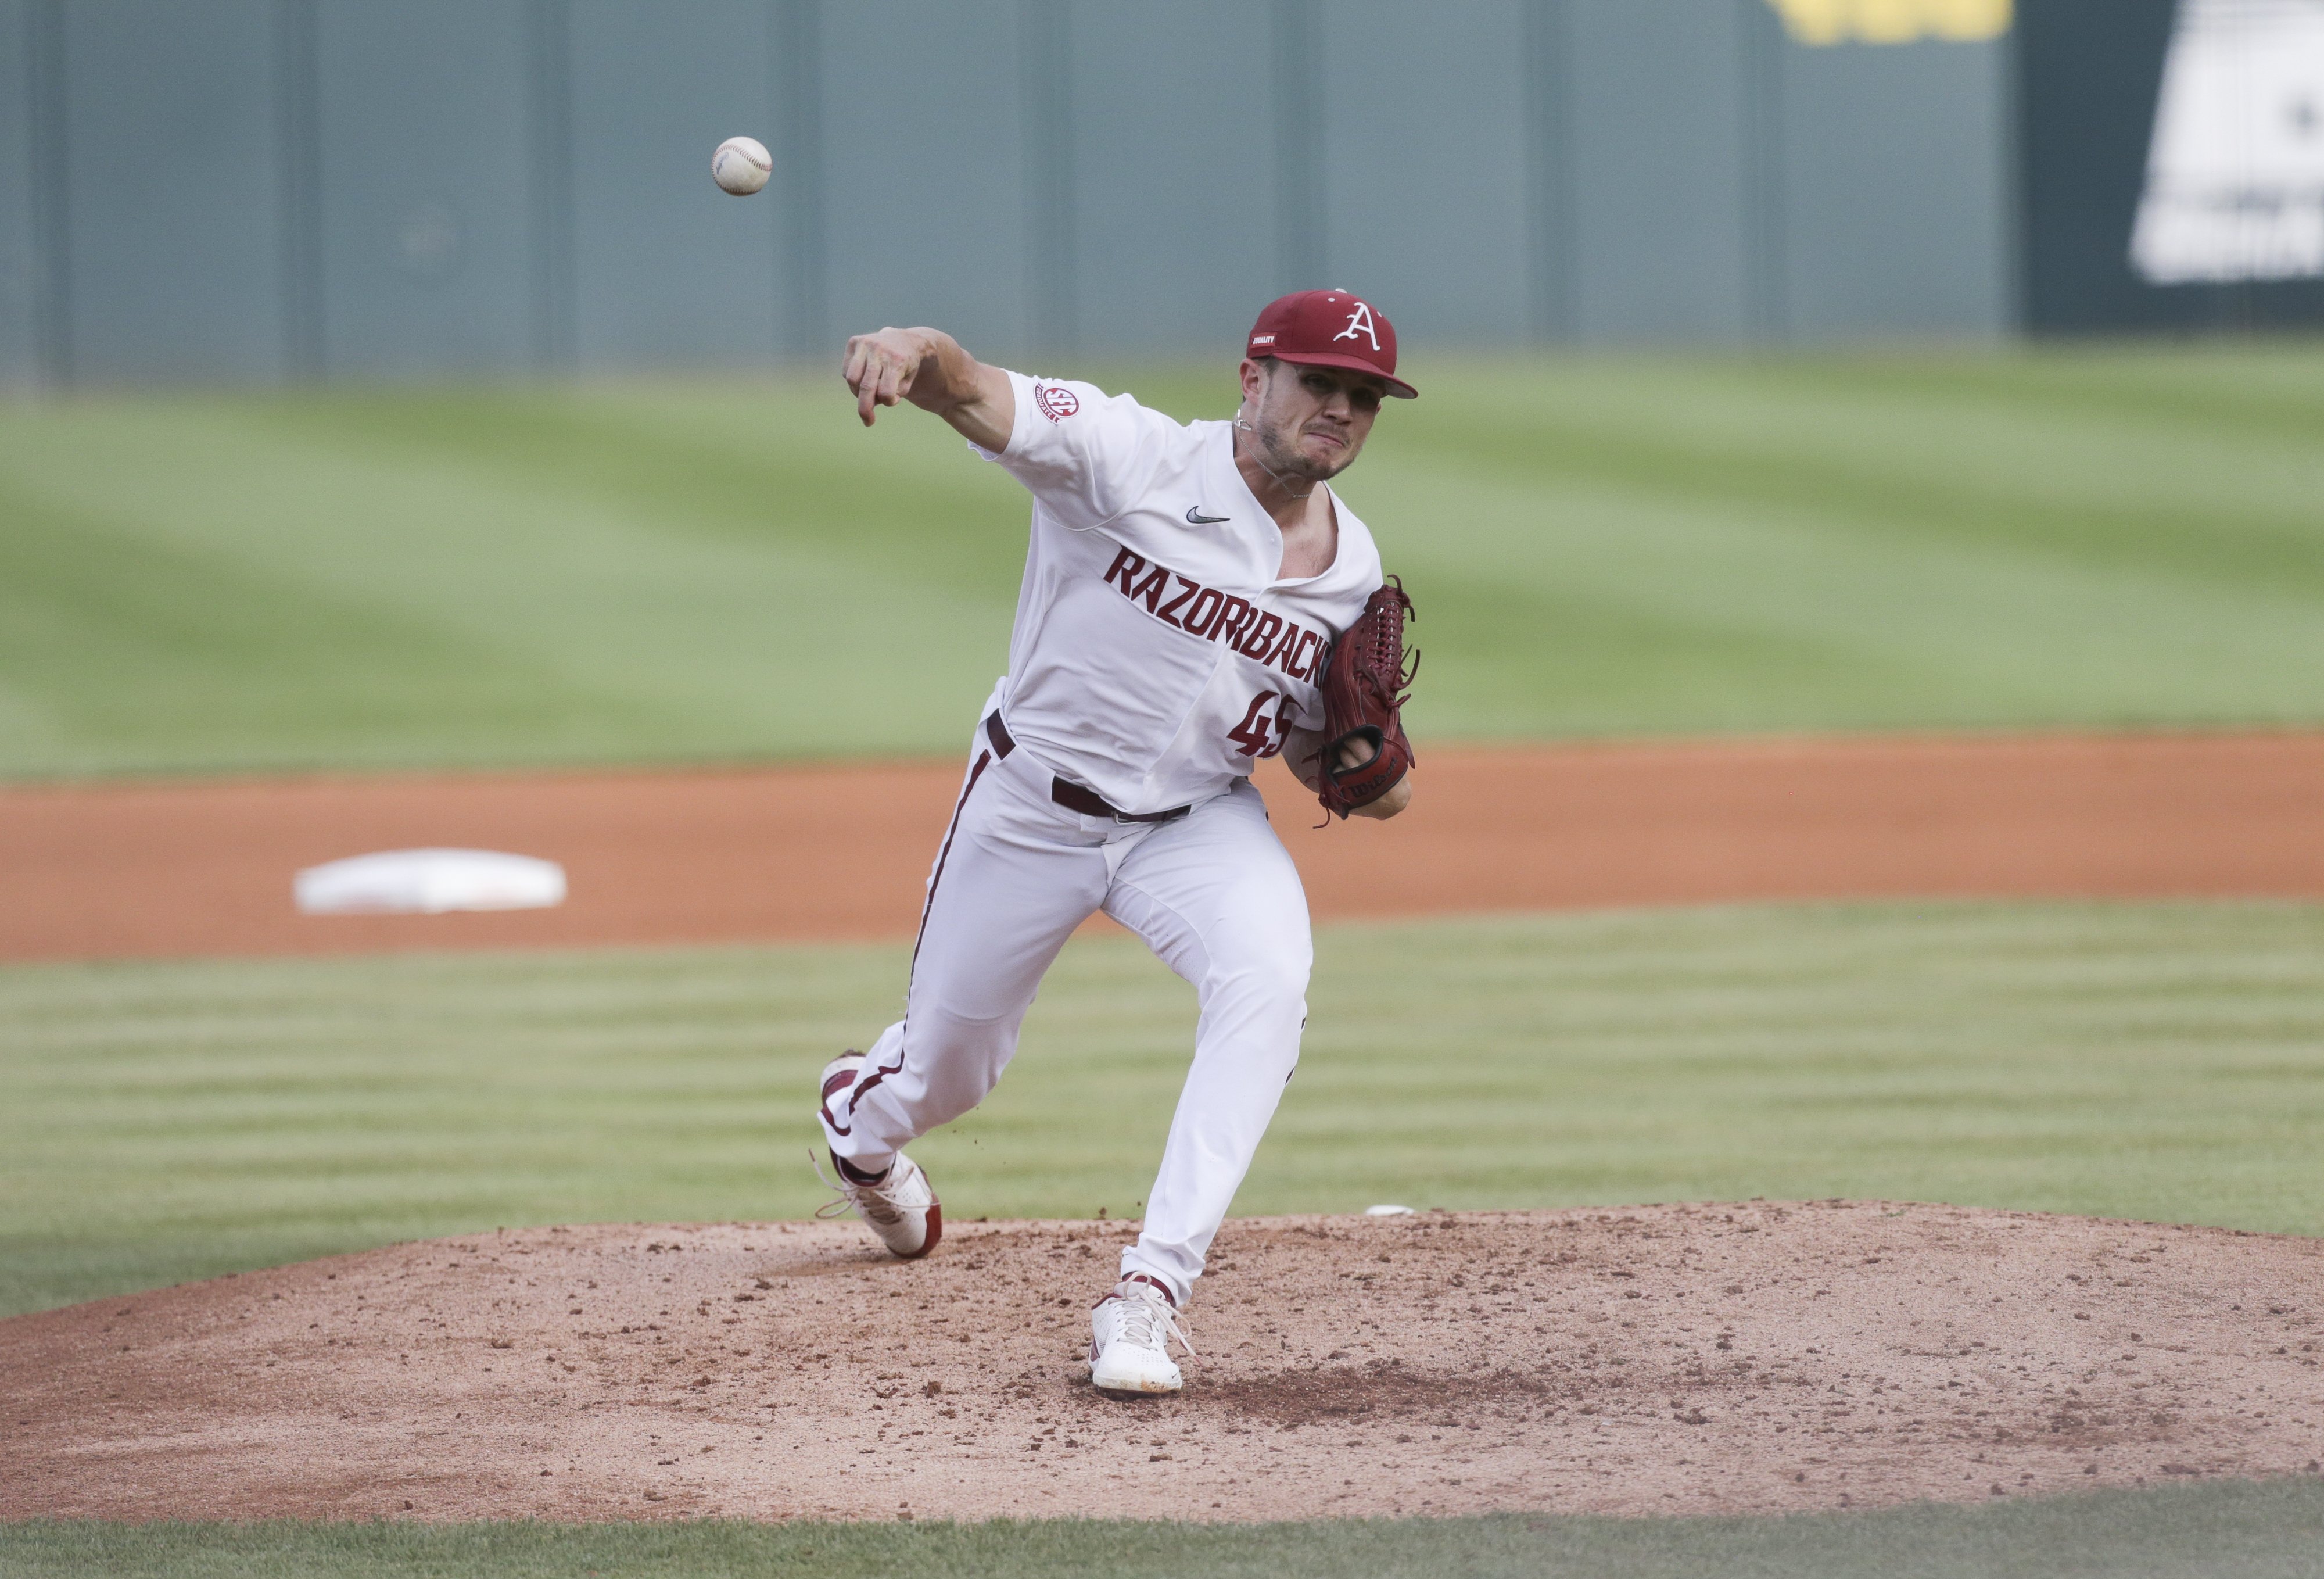 Arkansas pitcher Kevin Kopps drafted by Padres